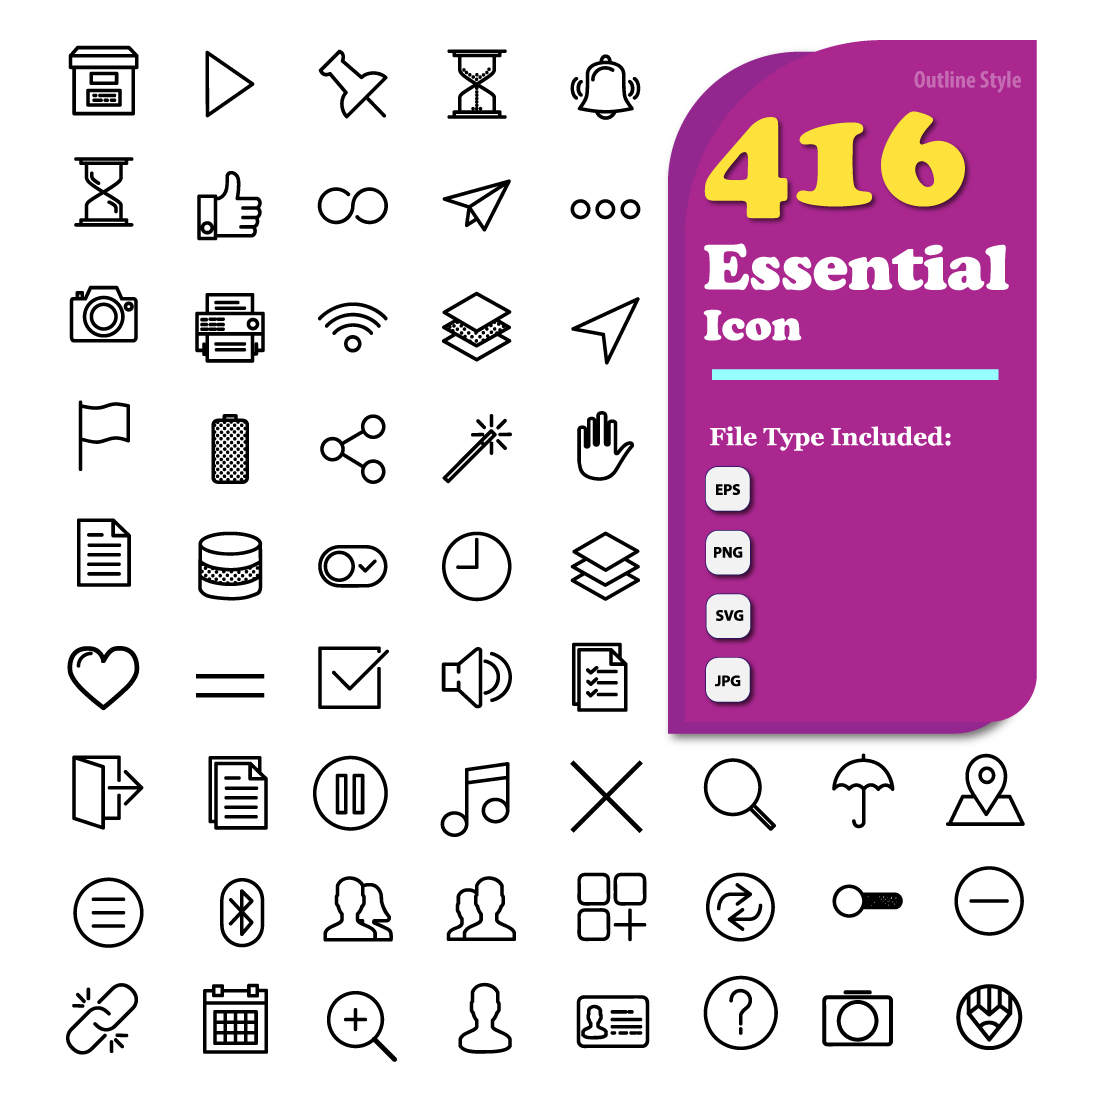 416 Essential Icons set, Outline Style Only $39 cover image.